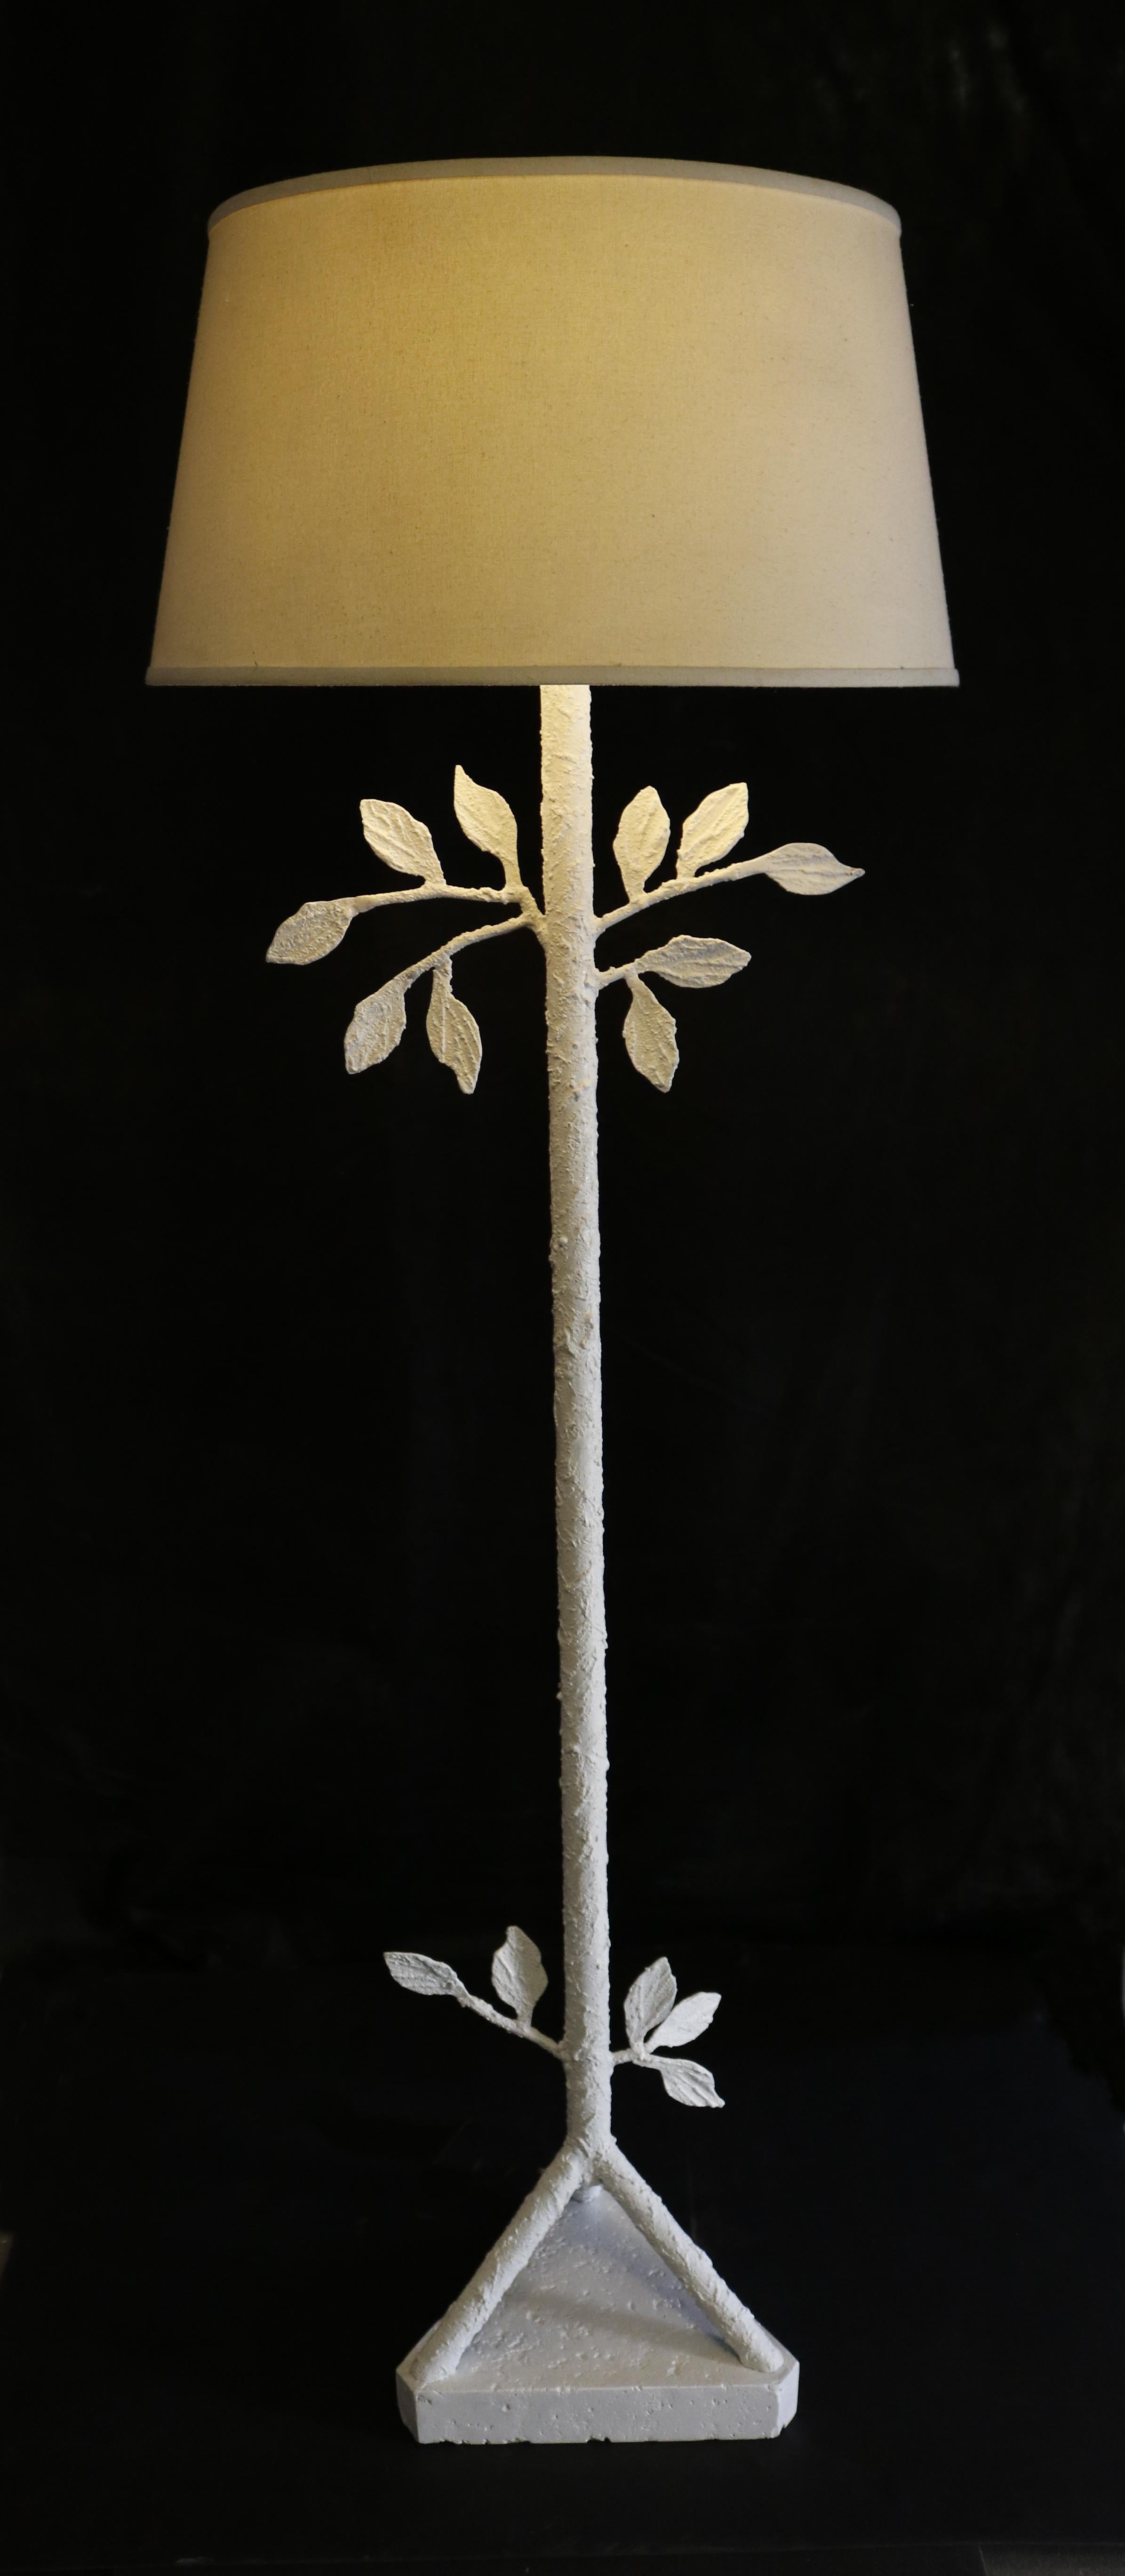 A unique floor lamp painted in white textured stucco along the stem, down to its' unique triangular base.
 There is also well-crafted leaf sculpture detailing on the stand reminding the work of Alberto Giacometti.